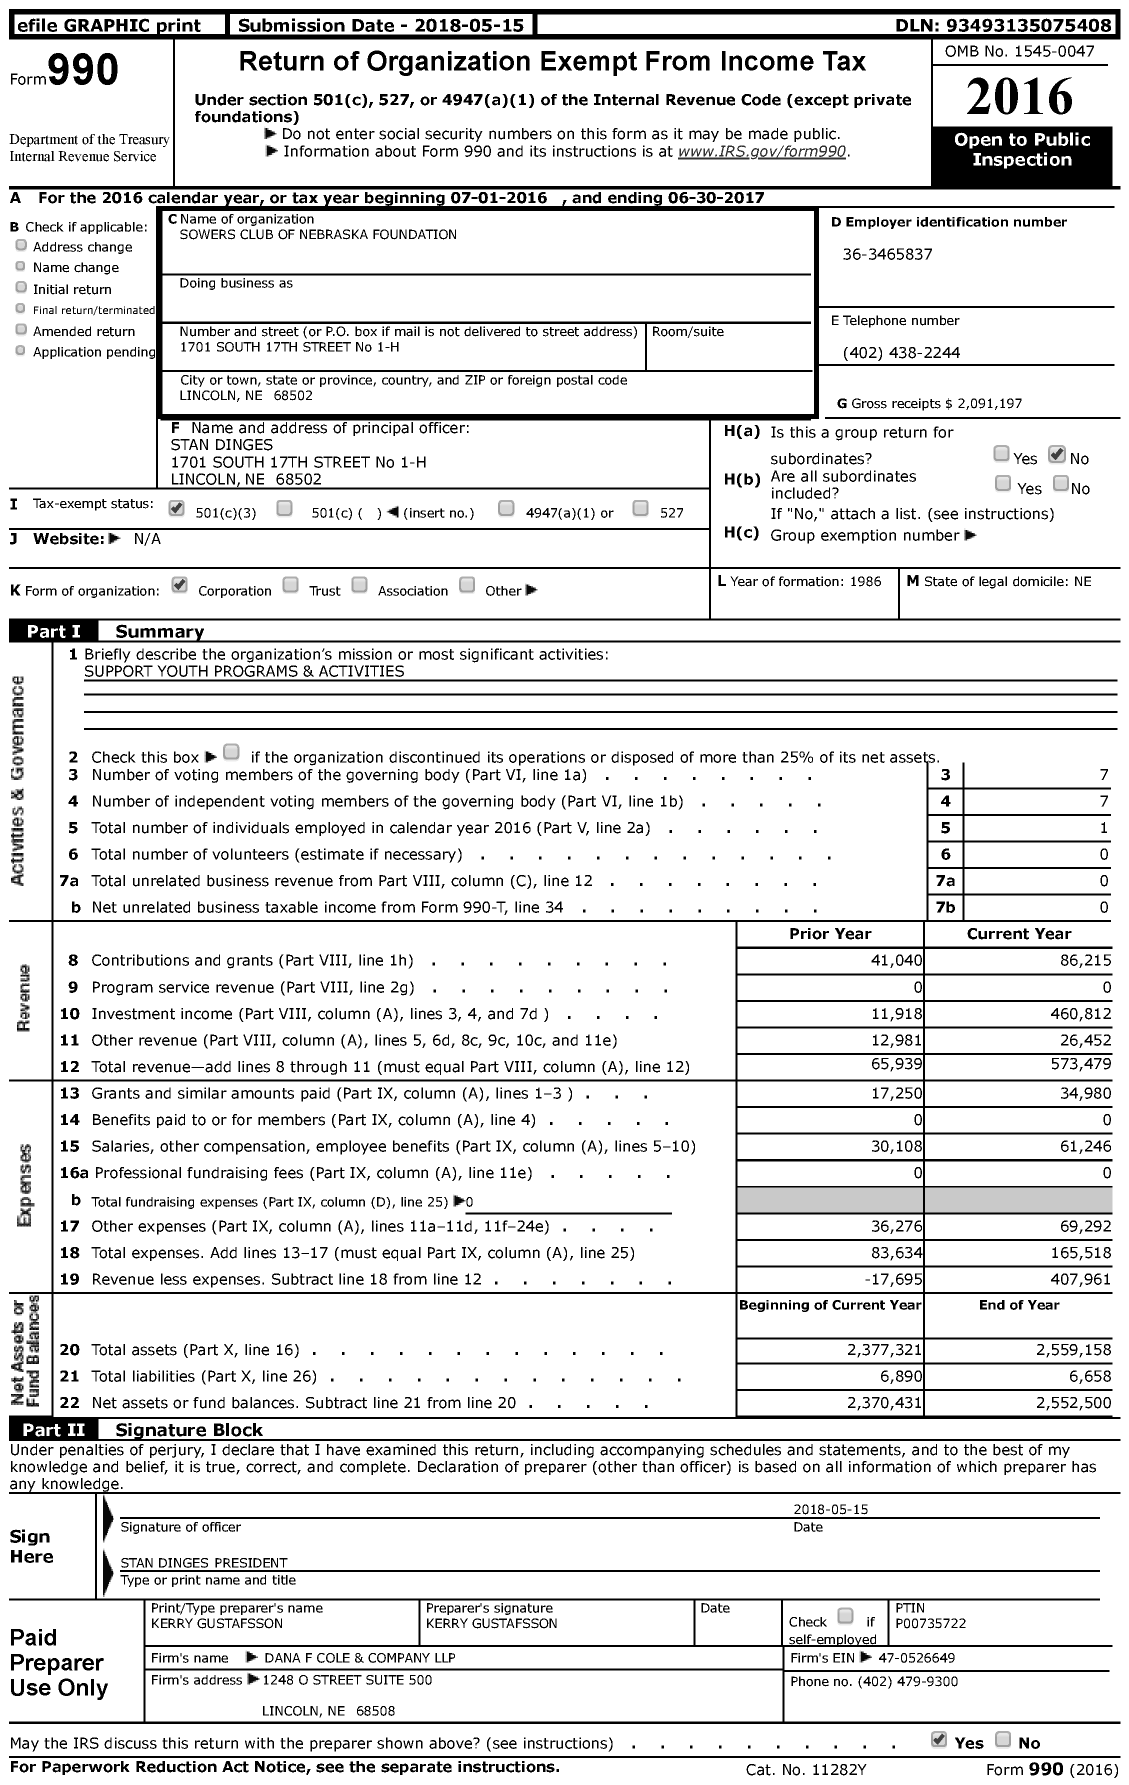 Image of first page of 2016 Form 990 for Sowers Club of Nebraska Foundation